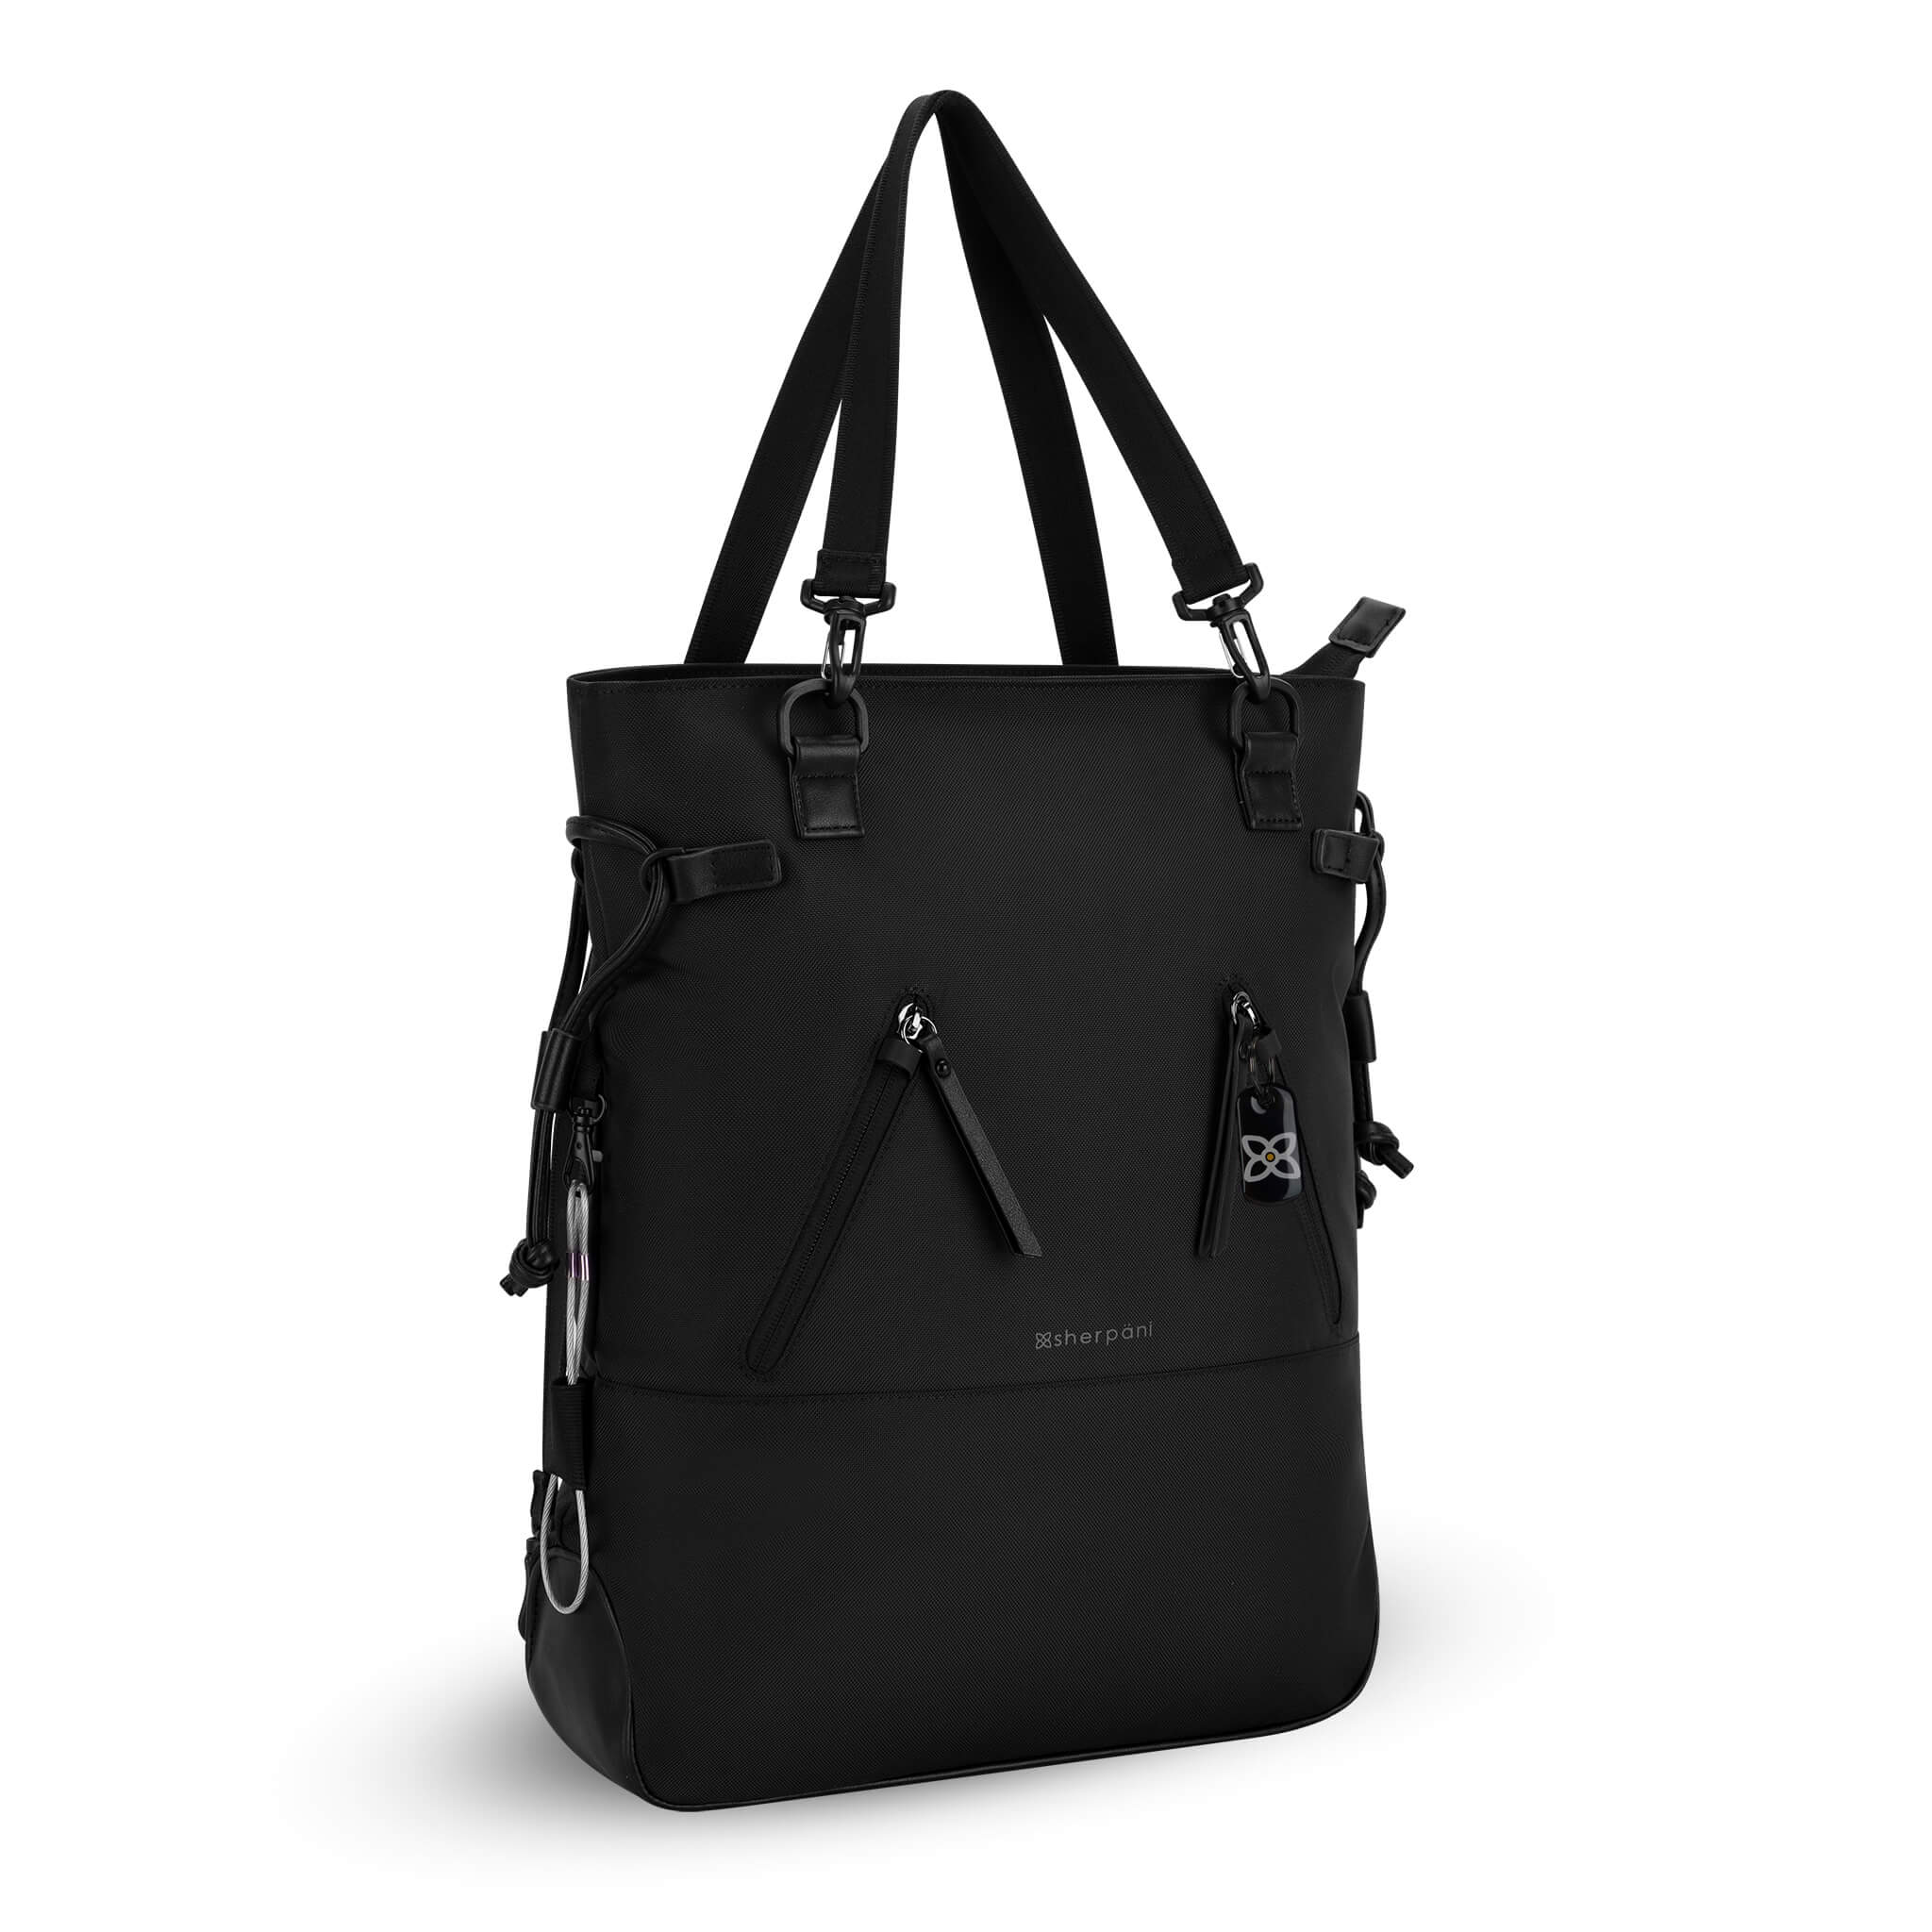 Angled front view of Sherpani Anti-Theft tote backpack, the Tempest in Carbon. The convertible bag includes RFID protection, locking zipper pockets, adjustable straps, and a trolley sleeve. 